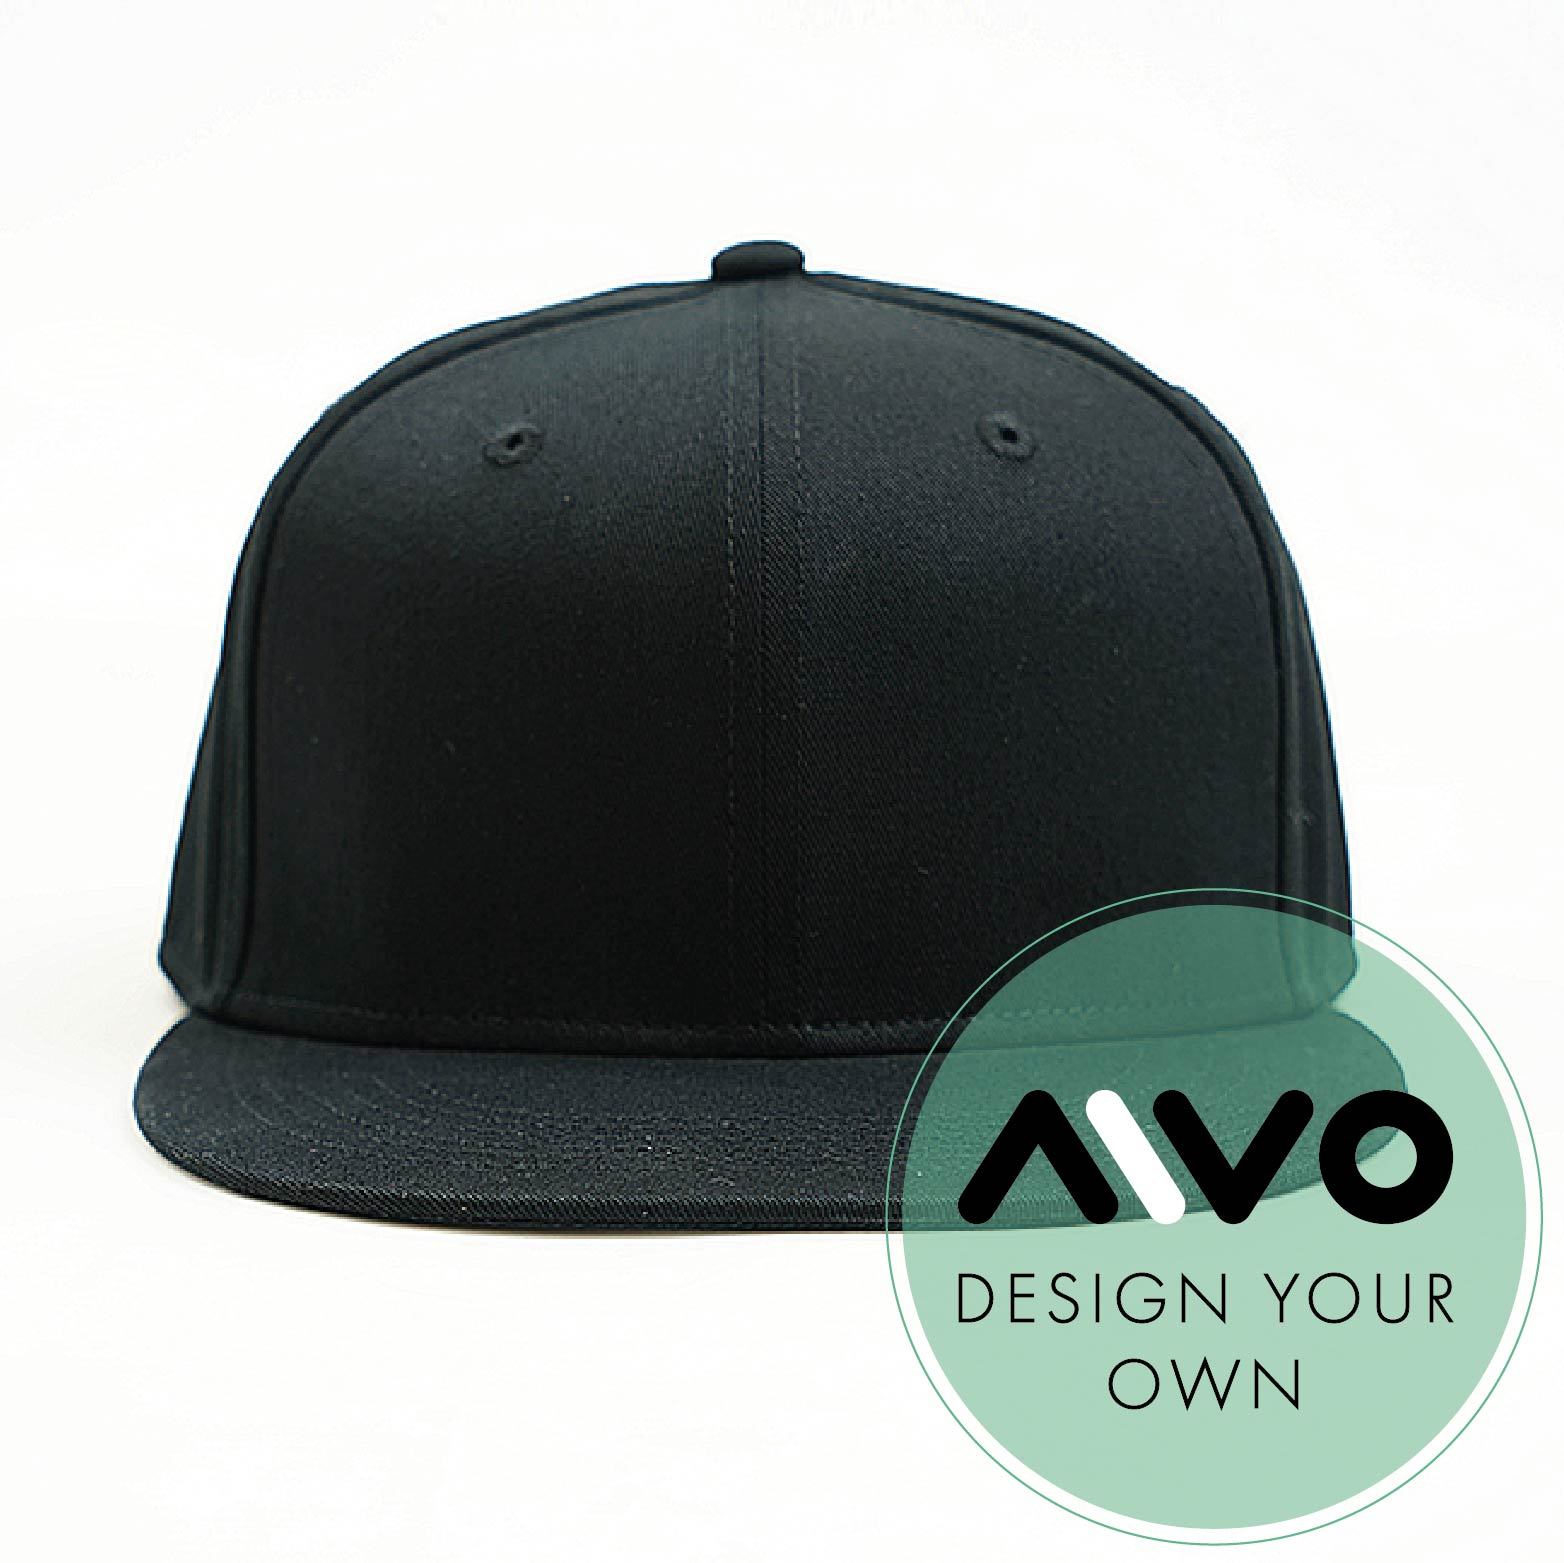 Flat peak Snapback - deign your own and add your own logo in black